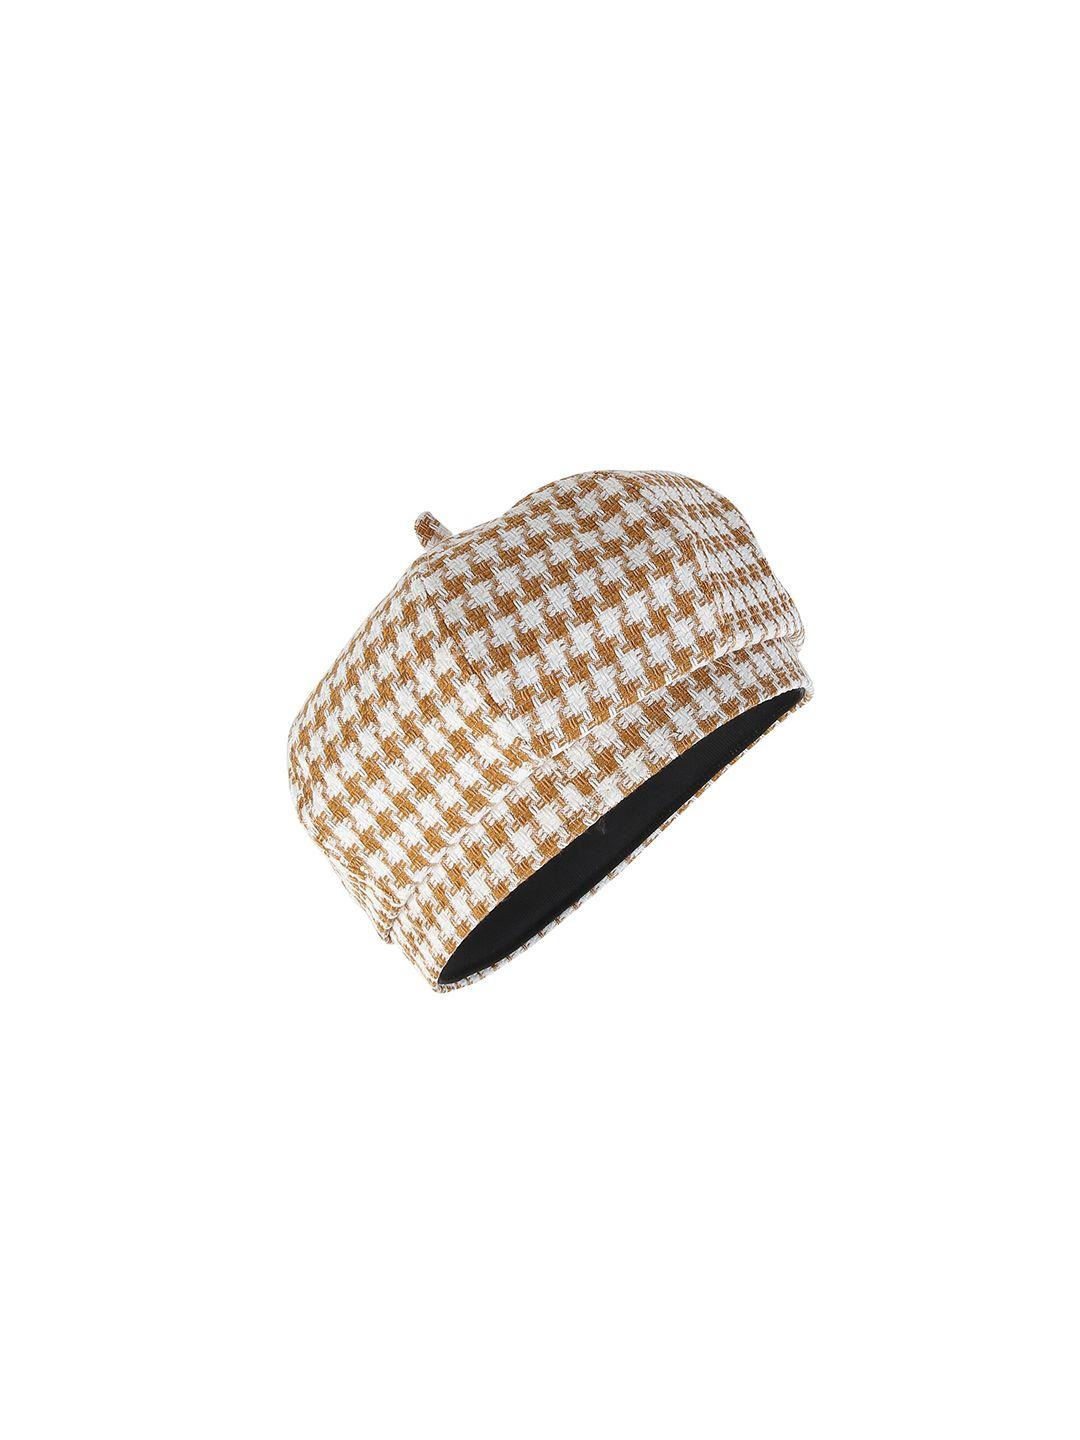 isweven unisex brown & white printed ascot cap